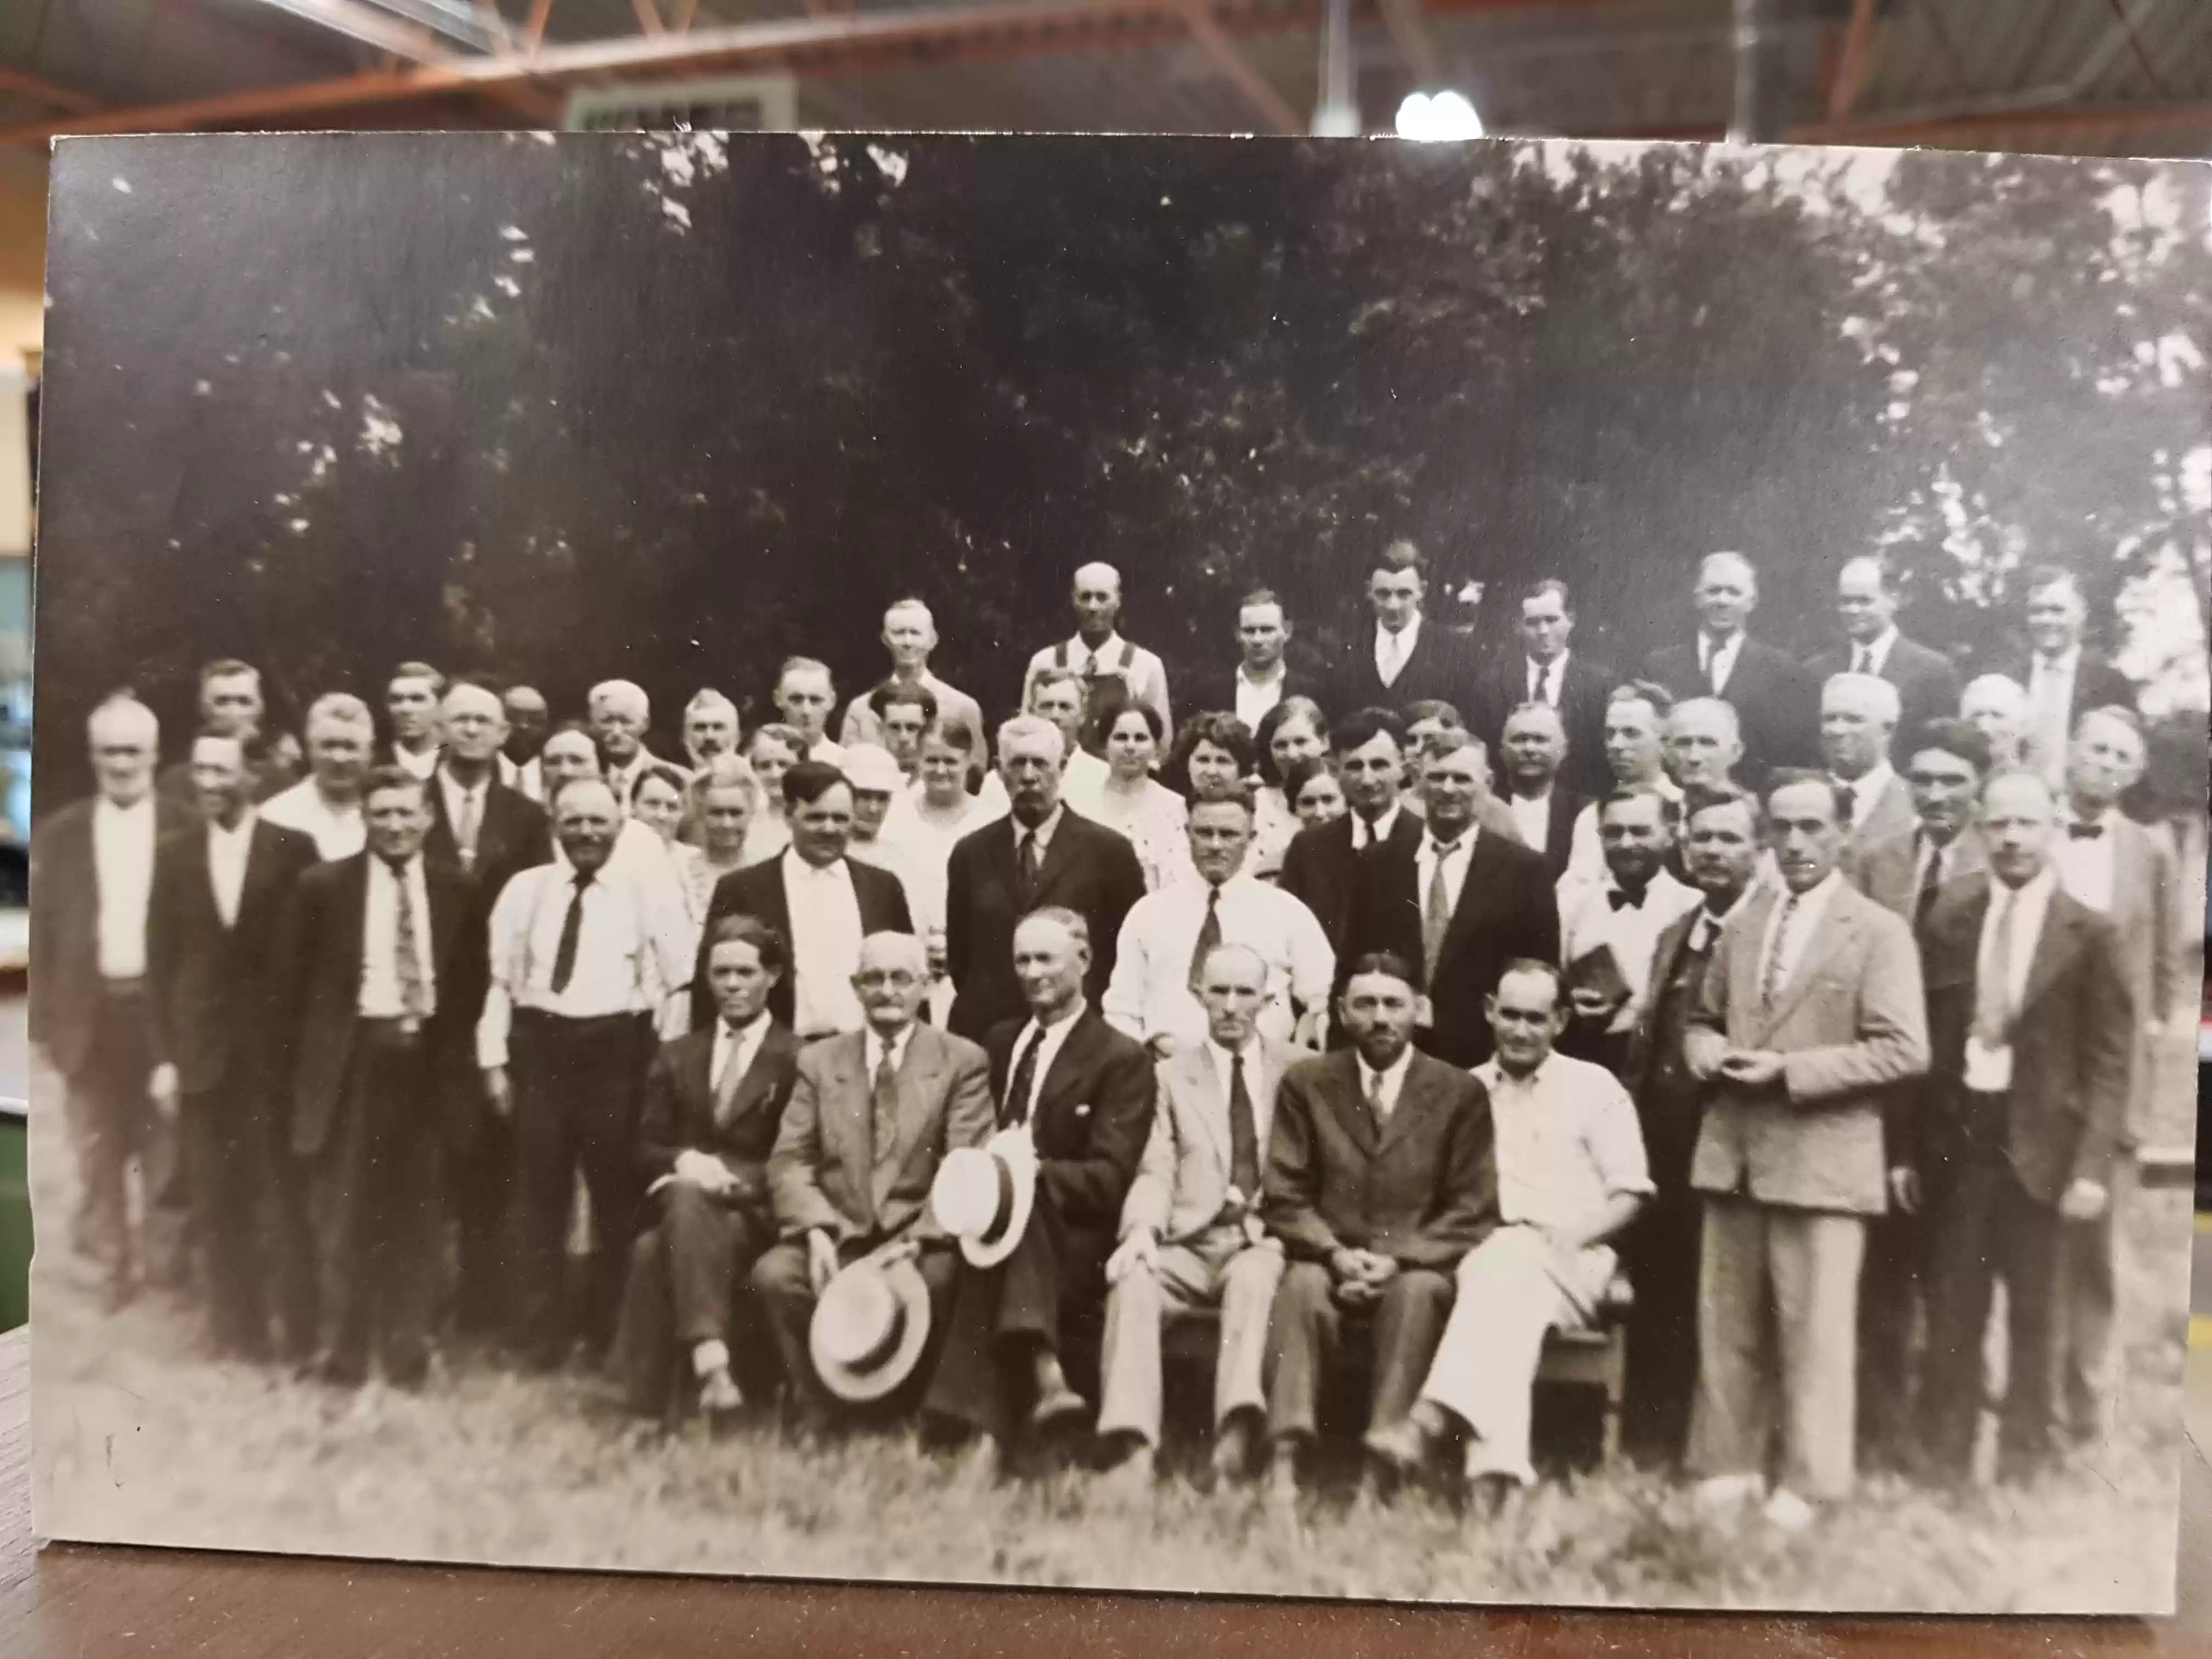 Dugger in grey suit bottom right cnr 1920s or 30s